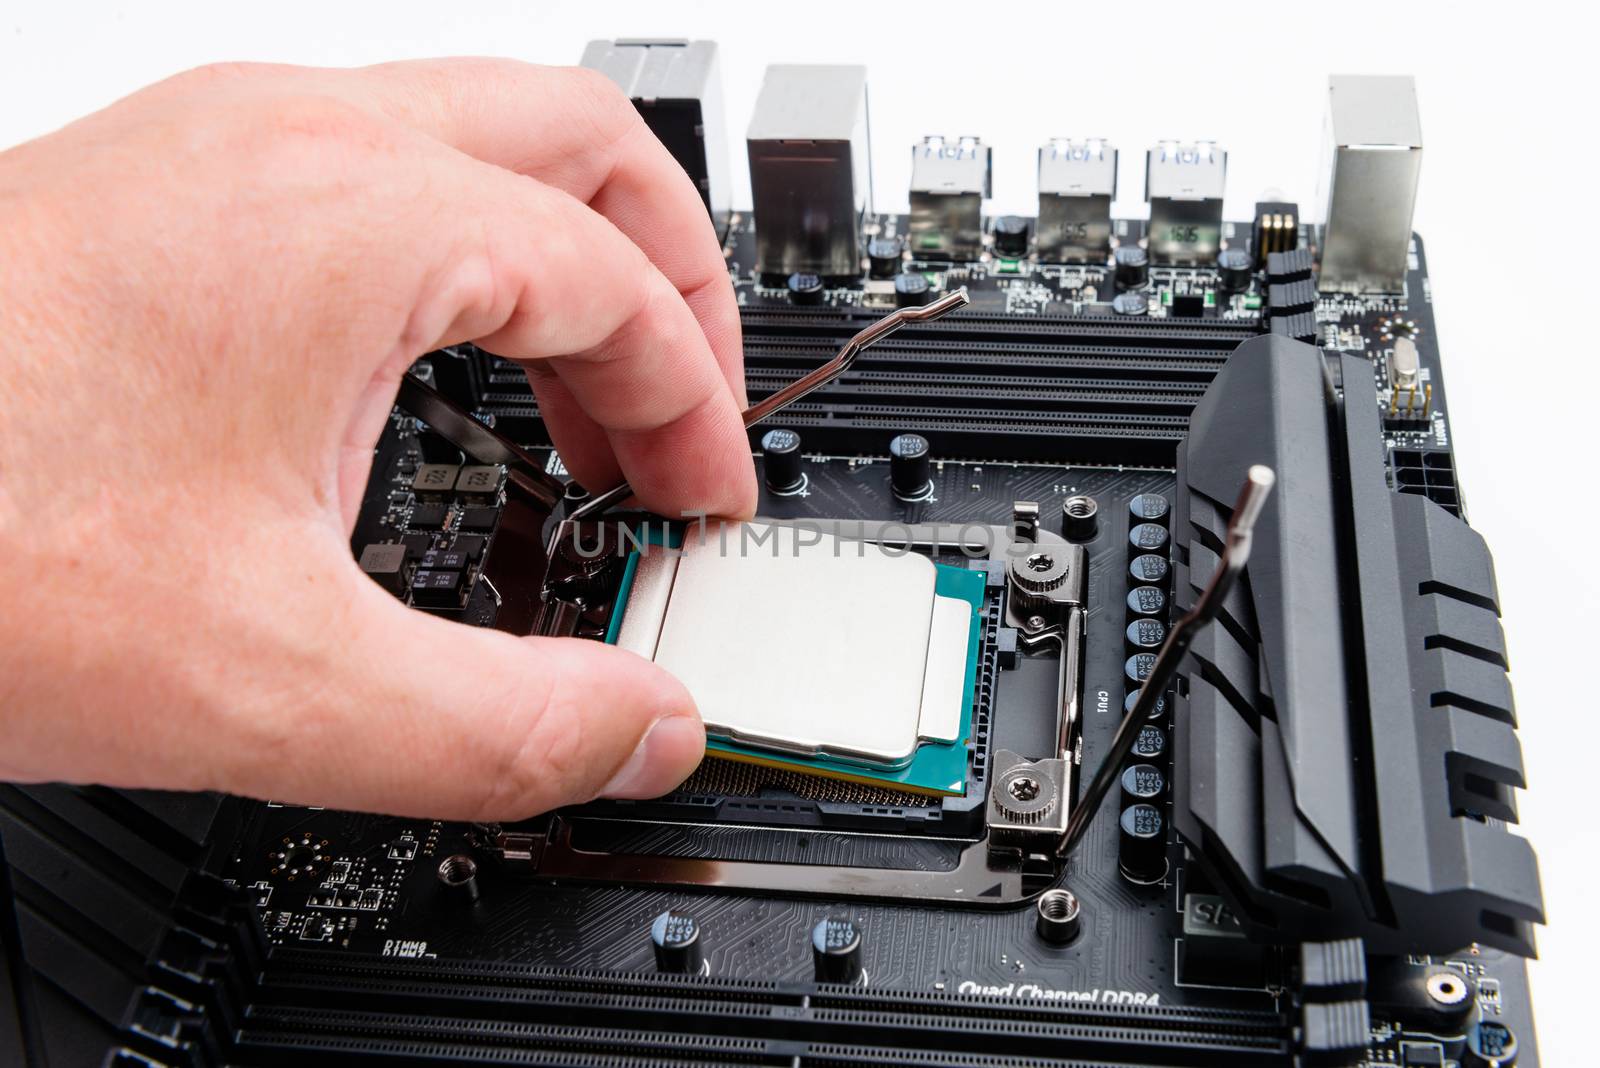 CPU socket and processor, installation on the motherboard. 